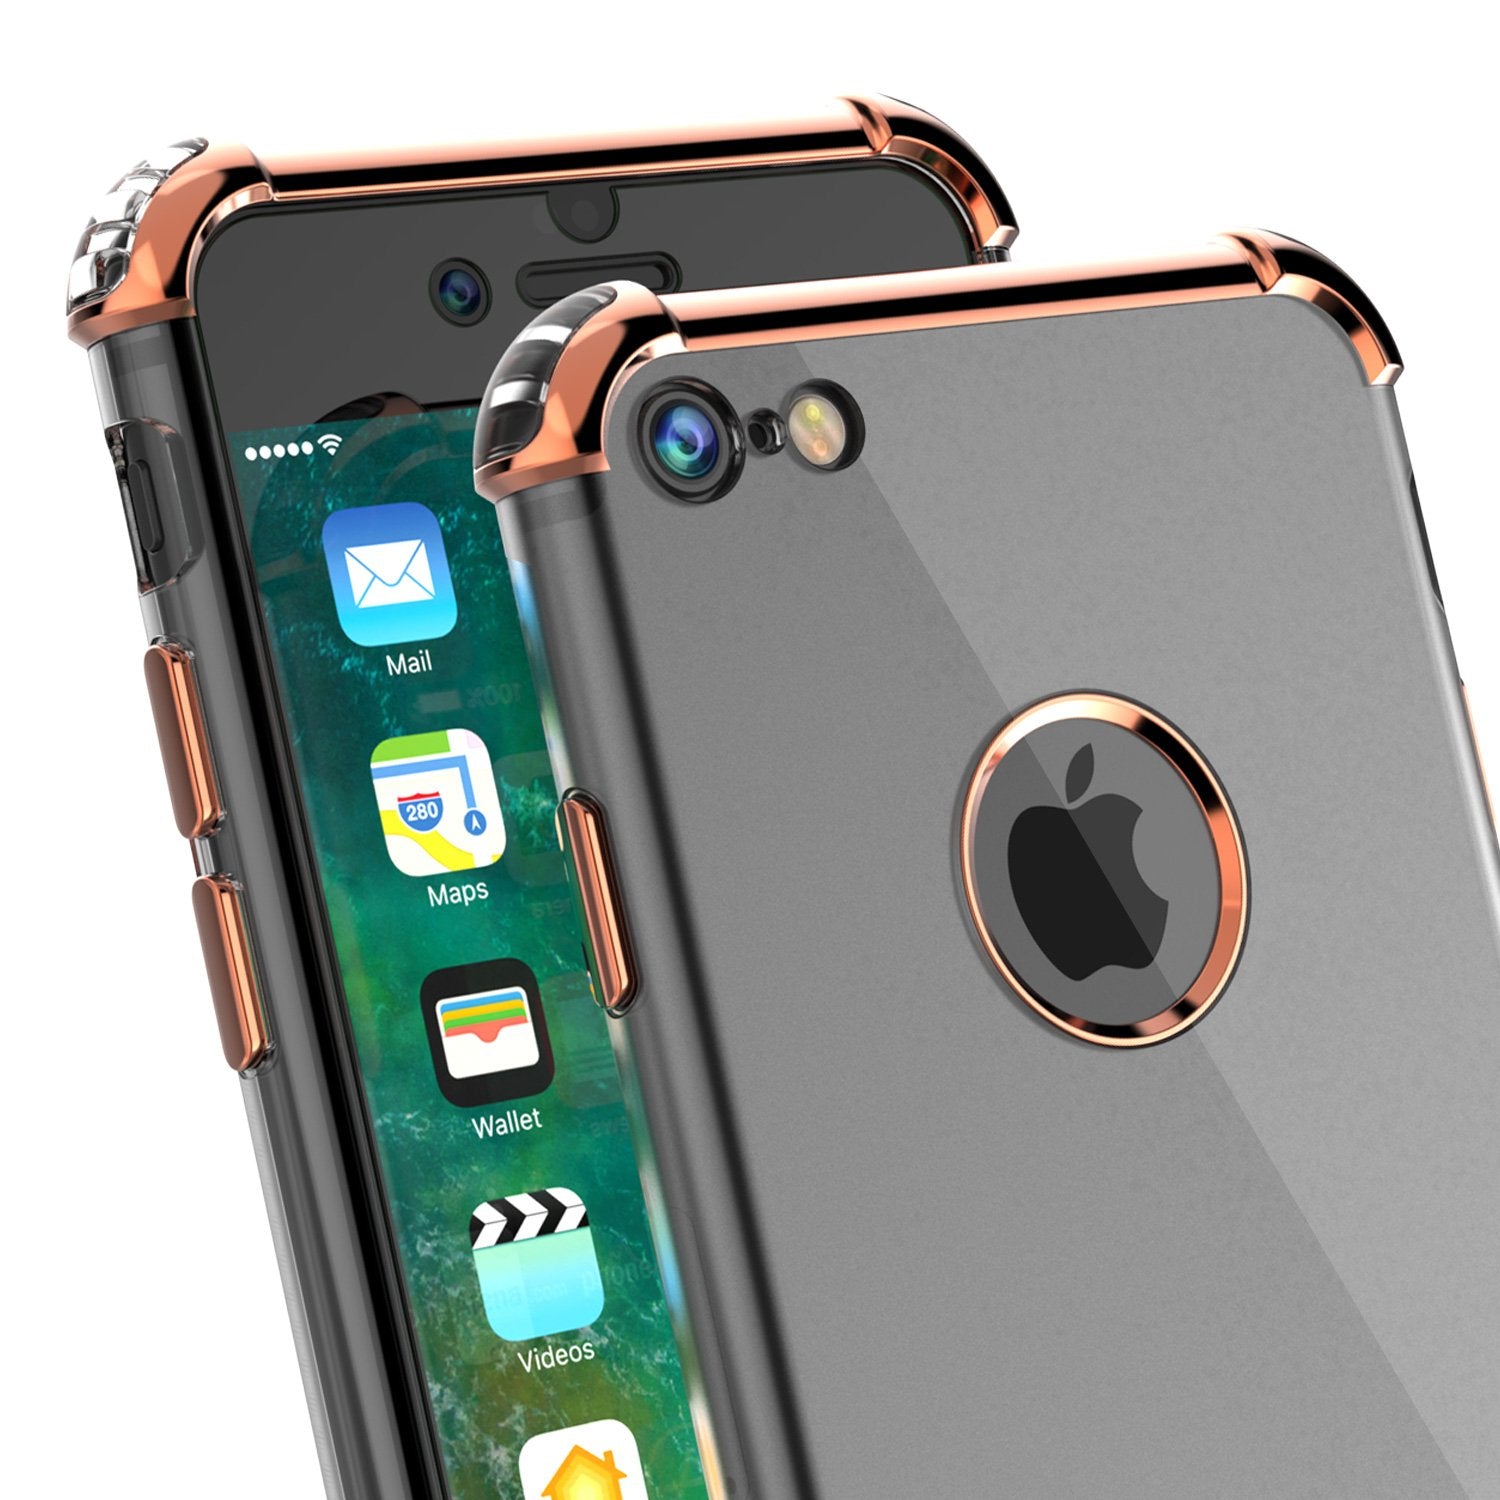 iPhone 7 Case, Punkcase [BLAZE RoseGold SERIES] Protective Cover W/ PunkShield Screen Protector